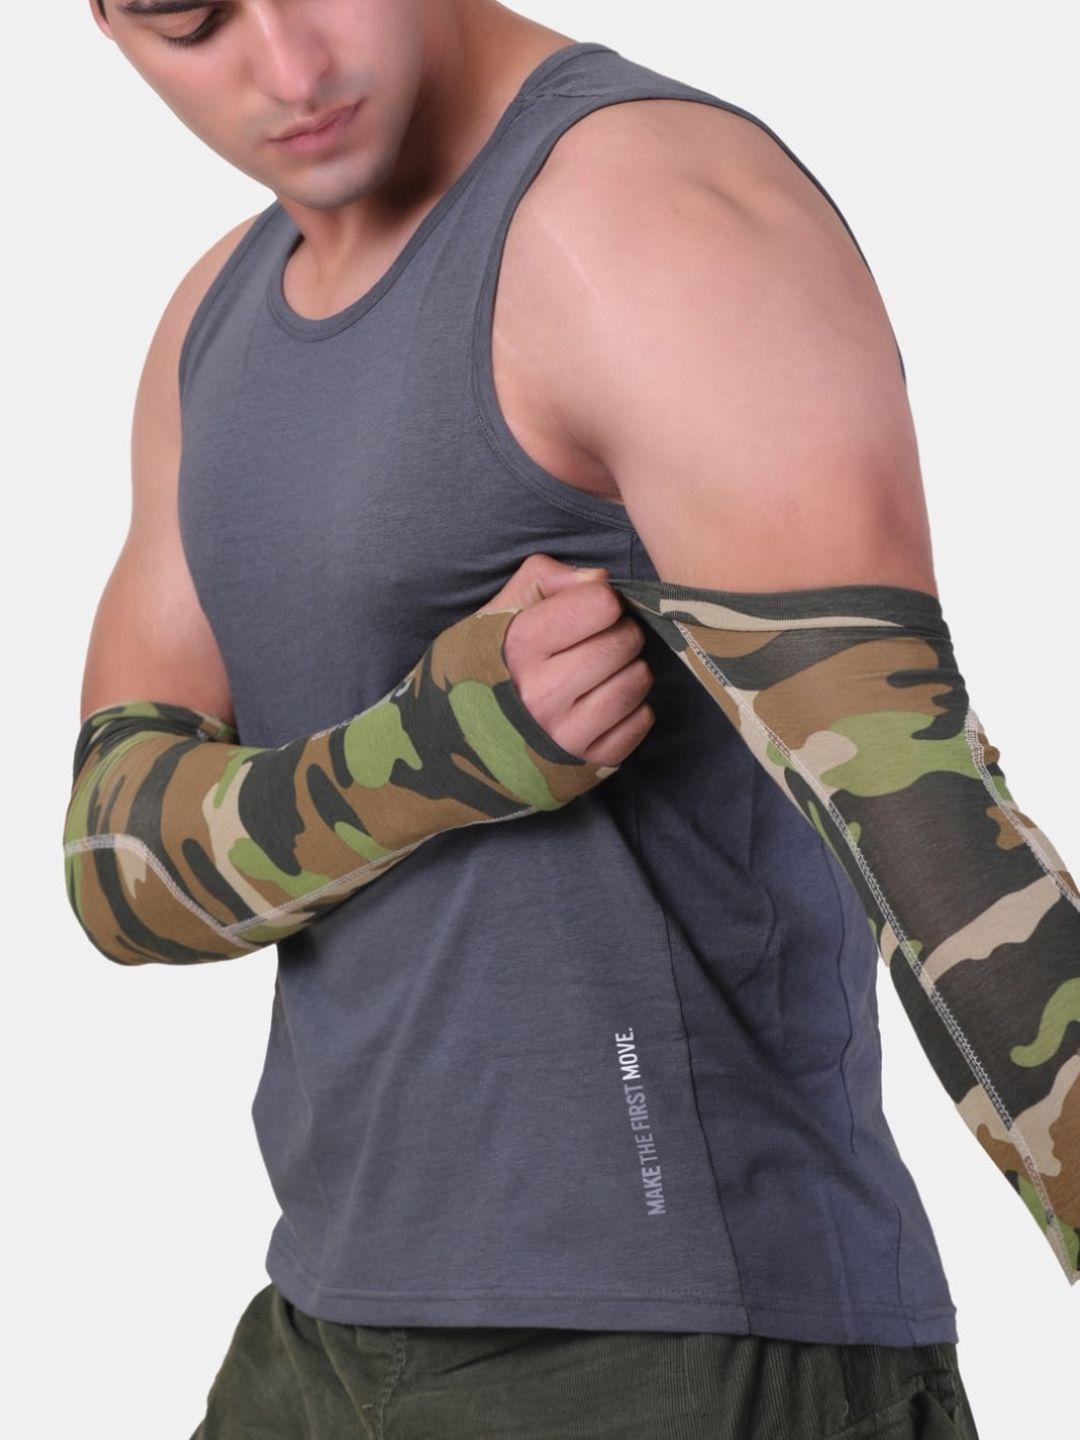 freecultr breathable cotton arm sleeves with in built glove